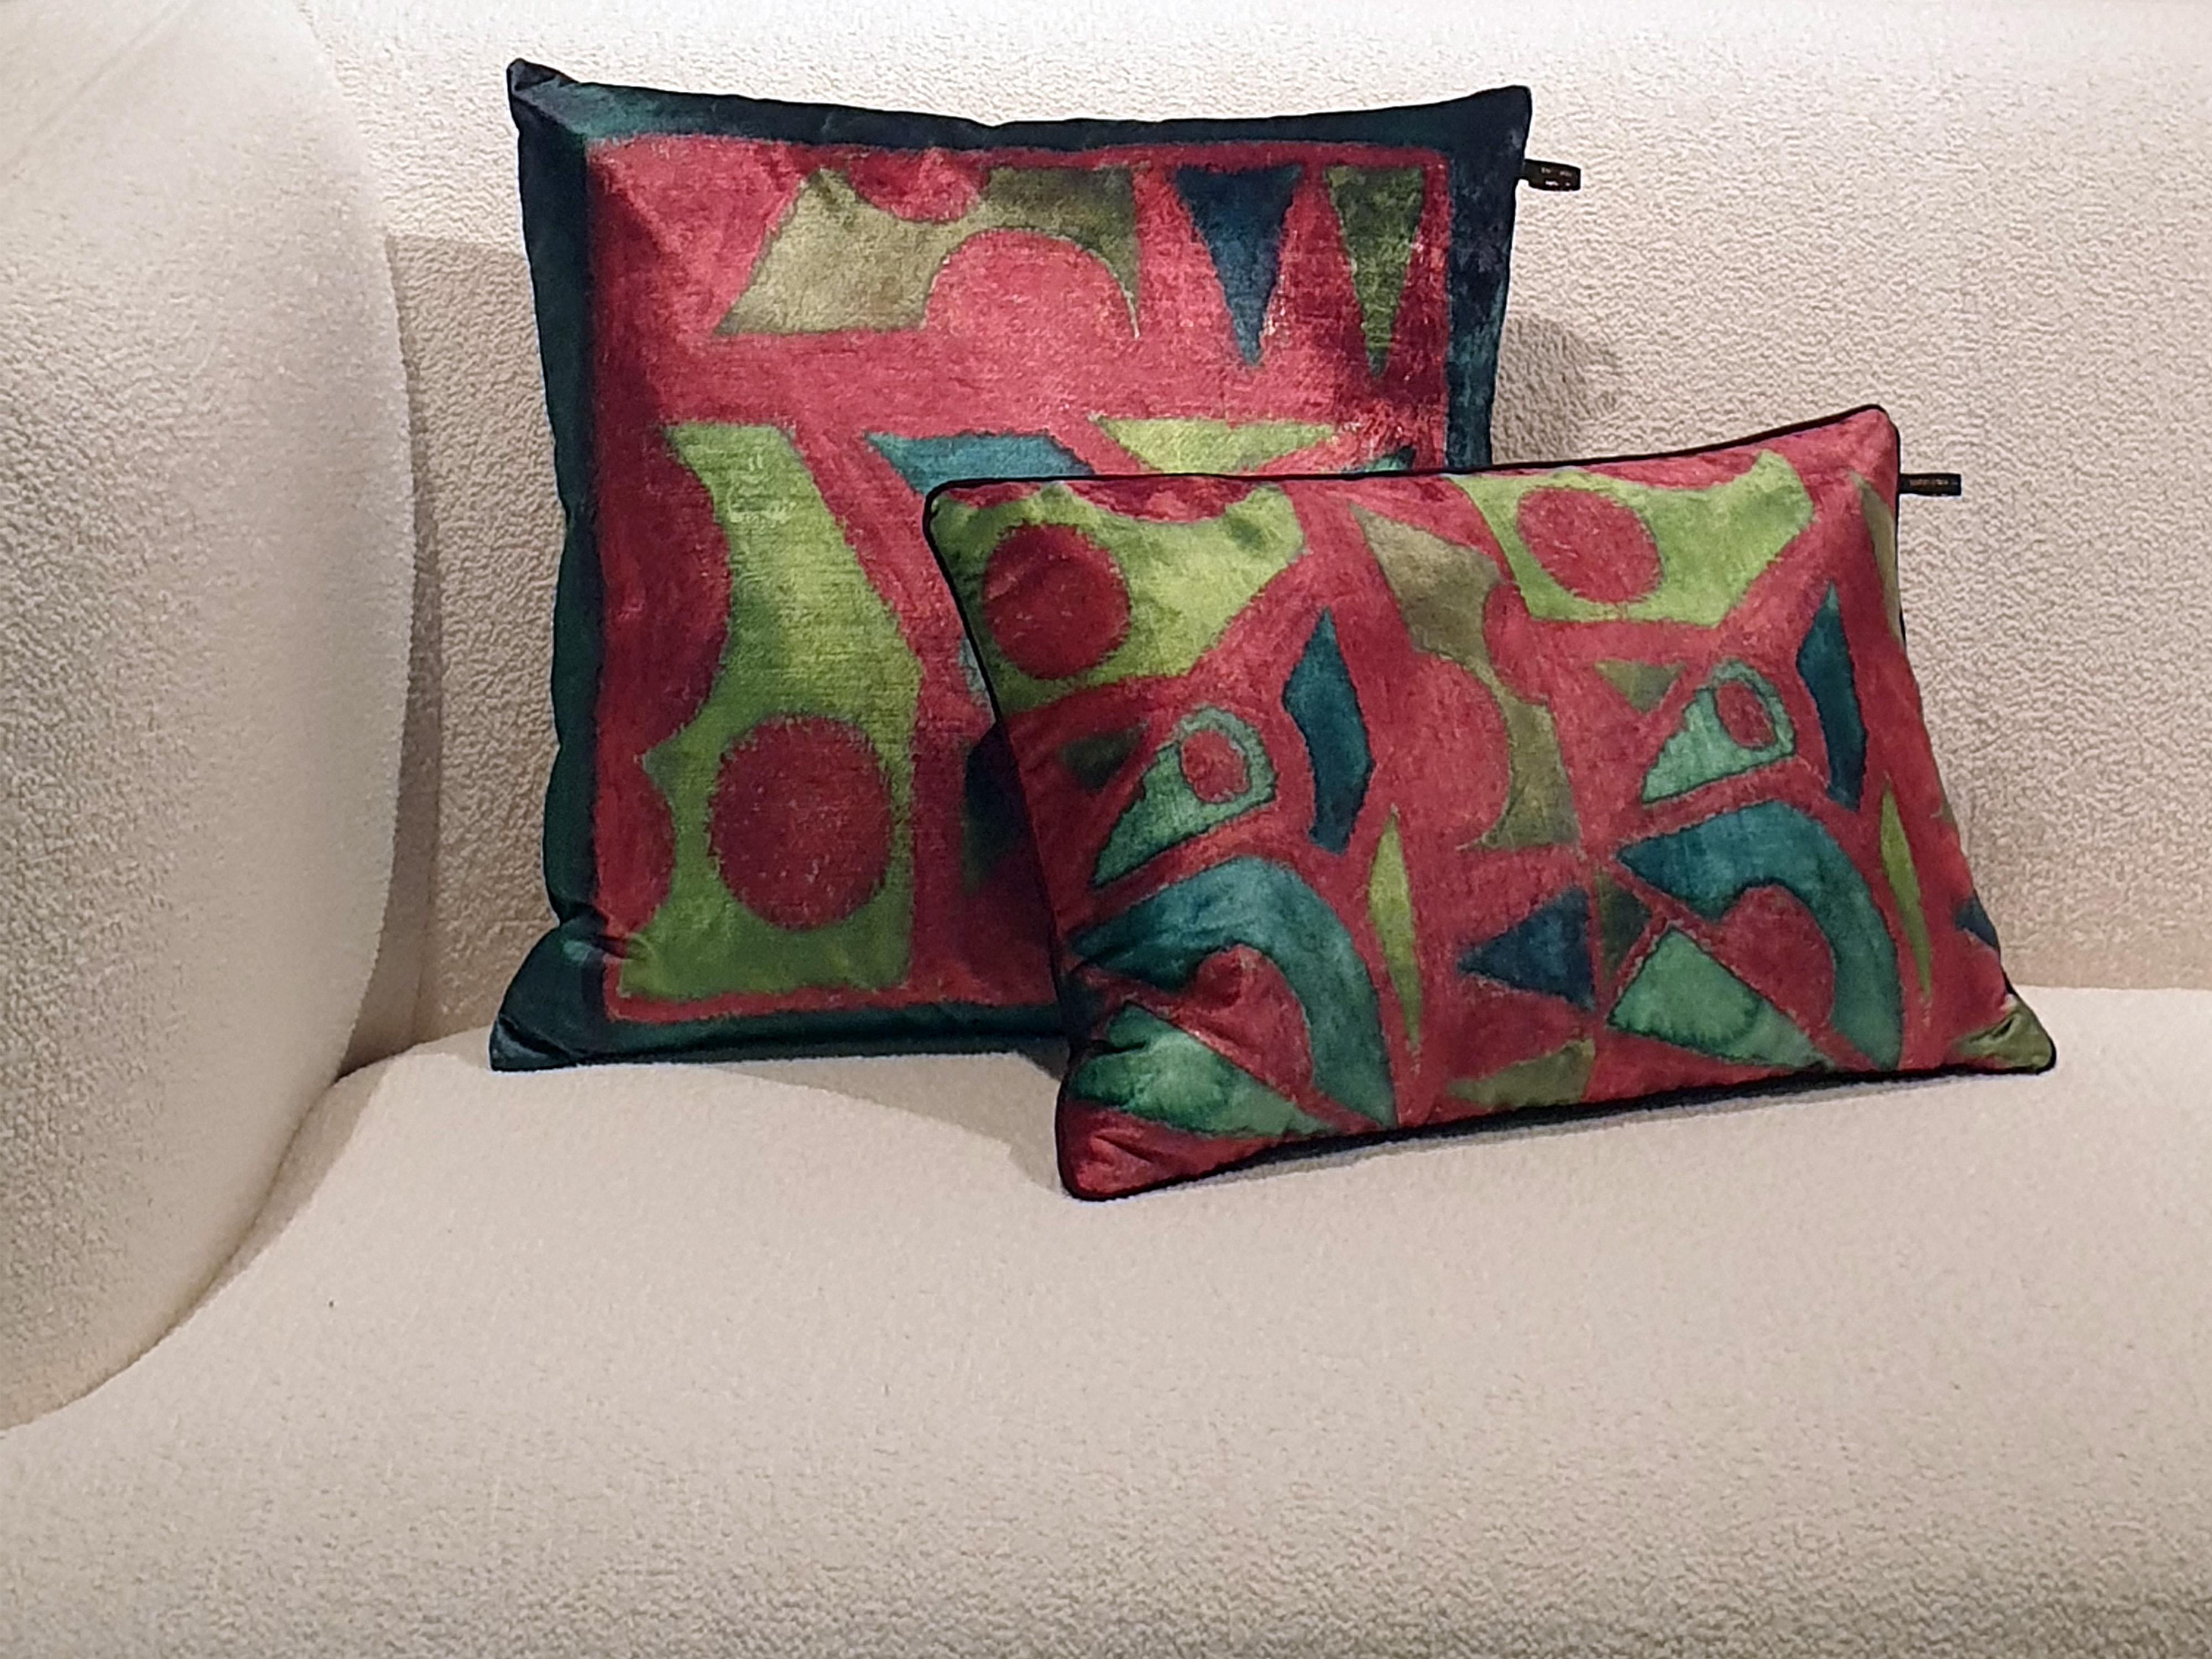 Chantal Keizer painted a number of ART works 
and transferred them to fabric in a limited collection. 
Of each work a maximum of 50 cushions 
are available worldwide.

The colours are deep greens and metallics, the backside is ruby red.

This design